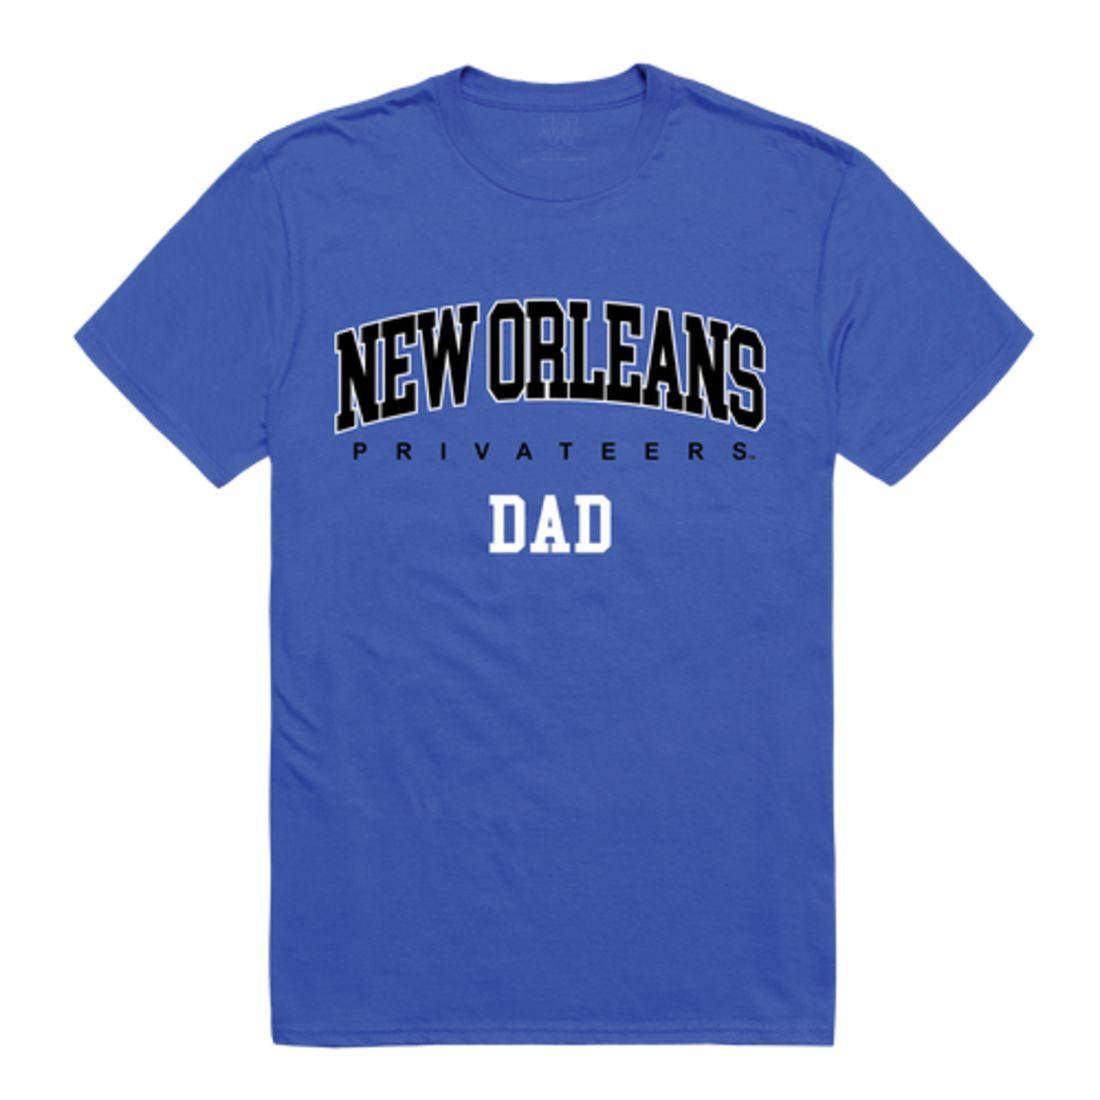 UNO University of New Orleans Privateers College Dad T-Shirt-Campus-Wardrobe